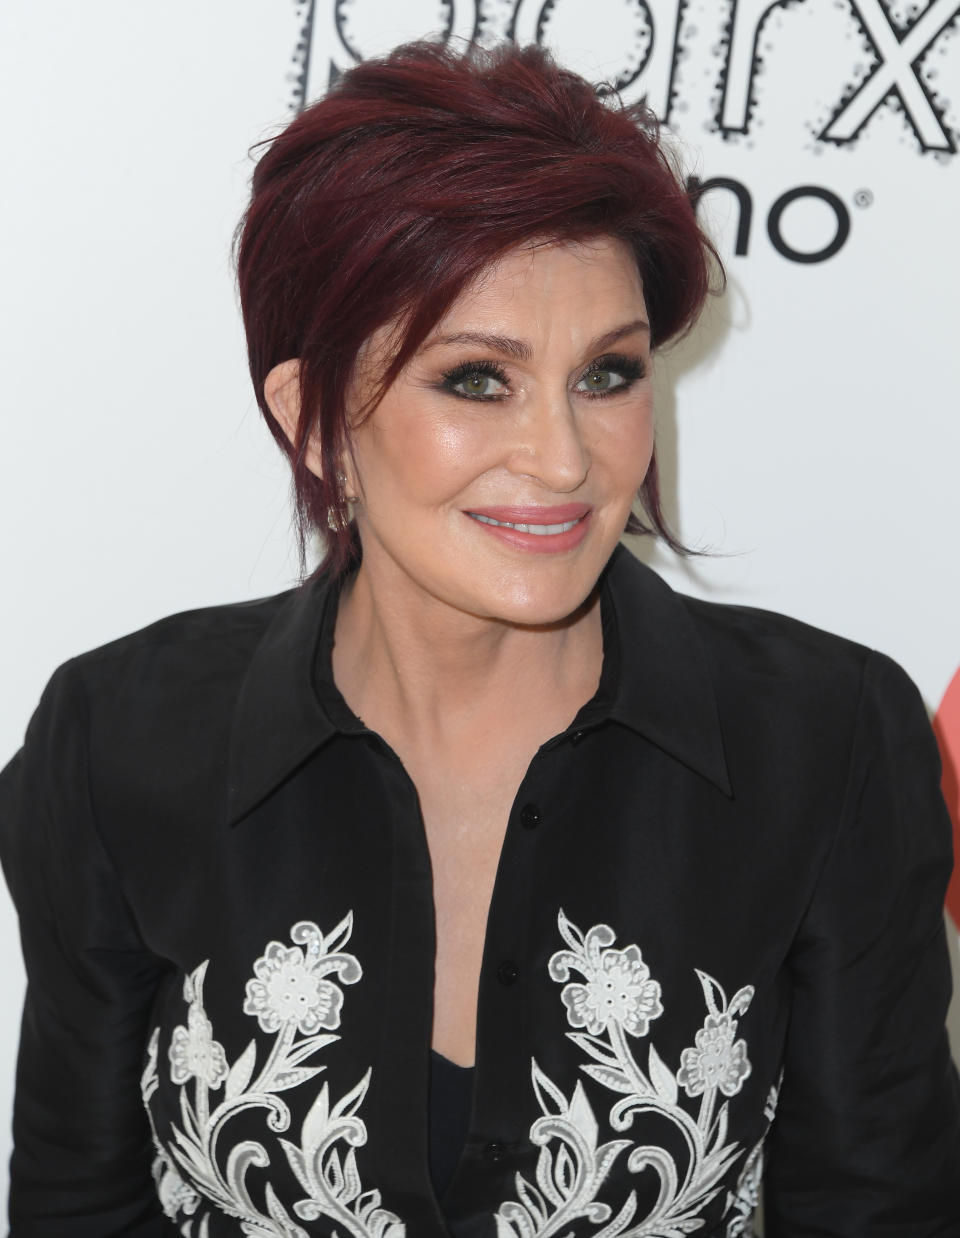 Sharon Osbourne arrives at the Elton John AIDS Foundation's 30th Annual Academy Awards Viewing Party on March 27, 2022 in West Hollywood, California. (Photo by Steve Granitz/FilmMagic)